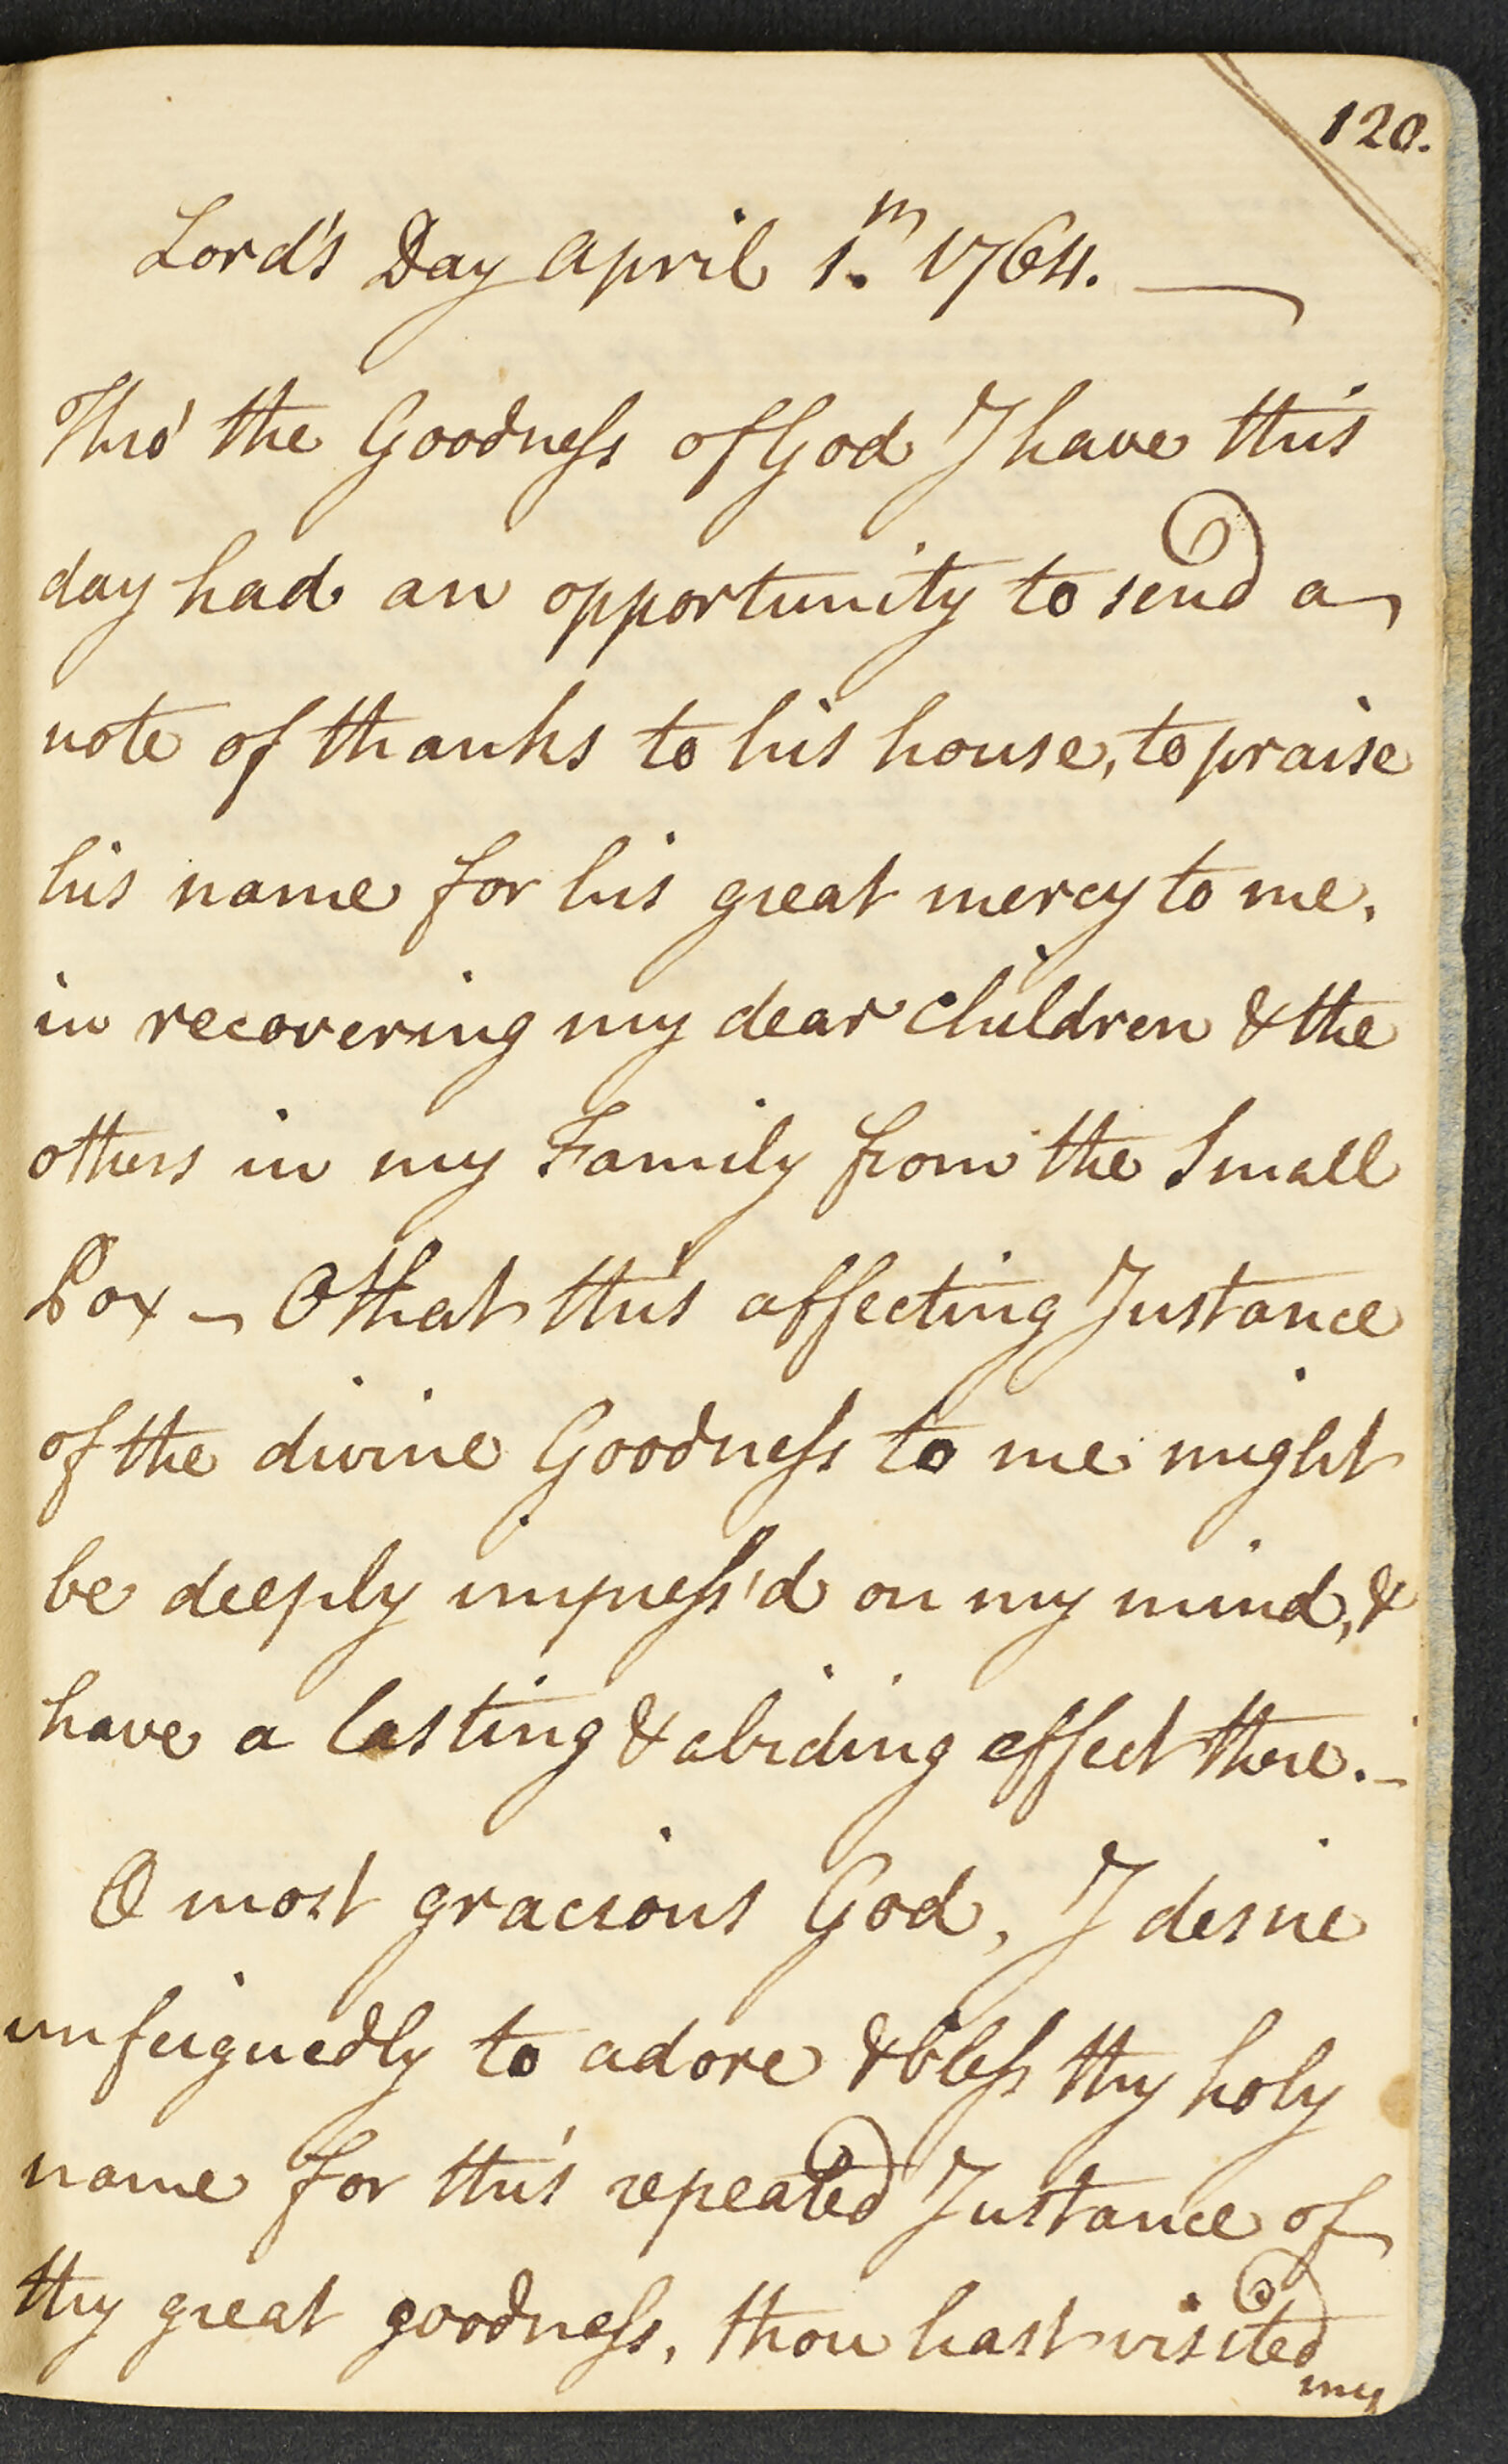 In this image provided by the American Ancestors & New England Historic Genealogical Society, a digitized copy of a page from a handwritten 18th century diary by the Rev. Ebenezer Storer, during a period of smallpox, in Boston, shows an April 1764 entry that includes a prayer Storer wrote weeks after arranging to have his own children inoculated. In the prayer, Storer gives thanks for the recovery of family members from the disease. (American Ancestors & New England Historic Genealogical Society via AP)